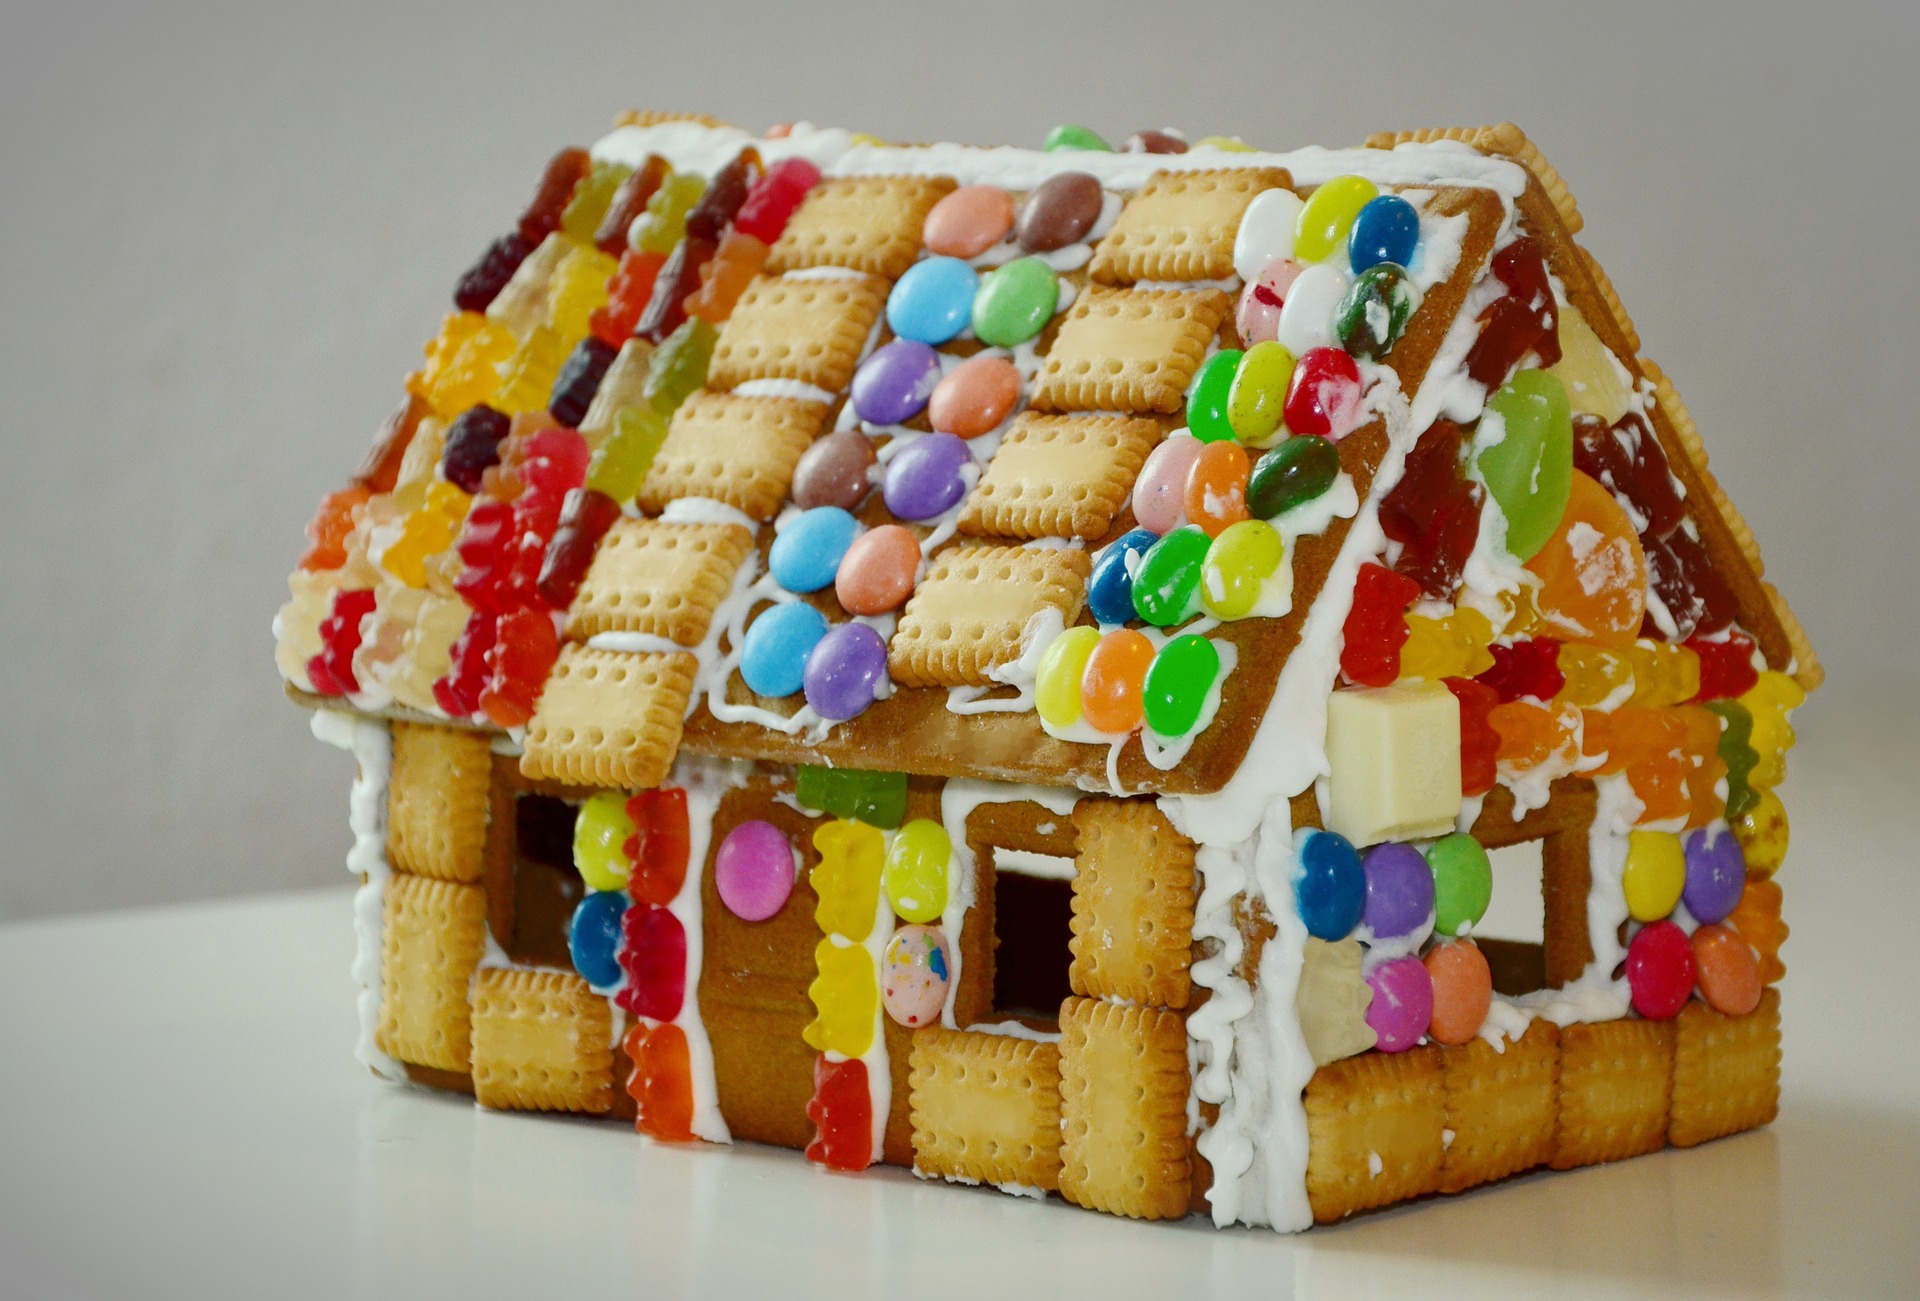 Gingerbread house decorated with candy.